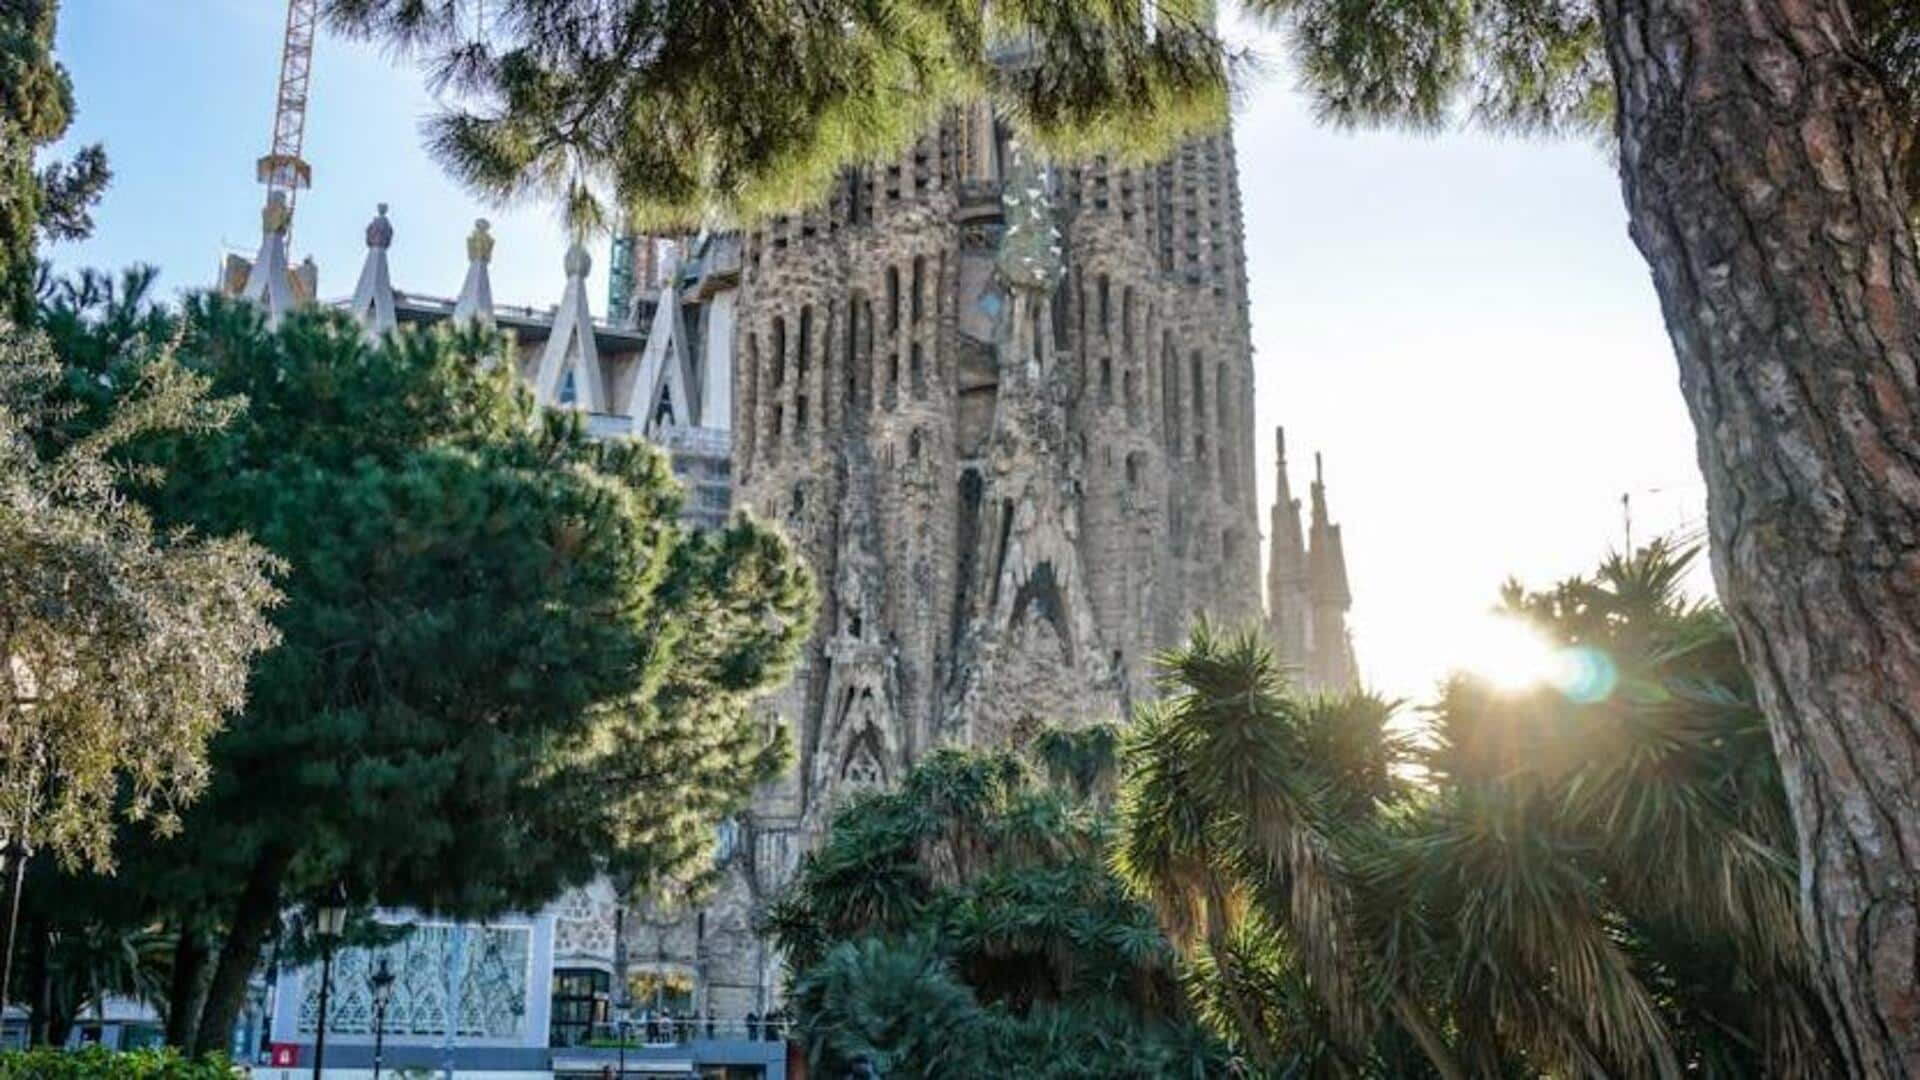 Barcelona's architectural gems that are worth seeing